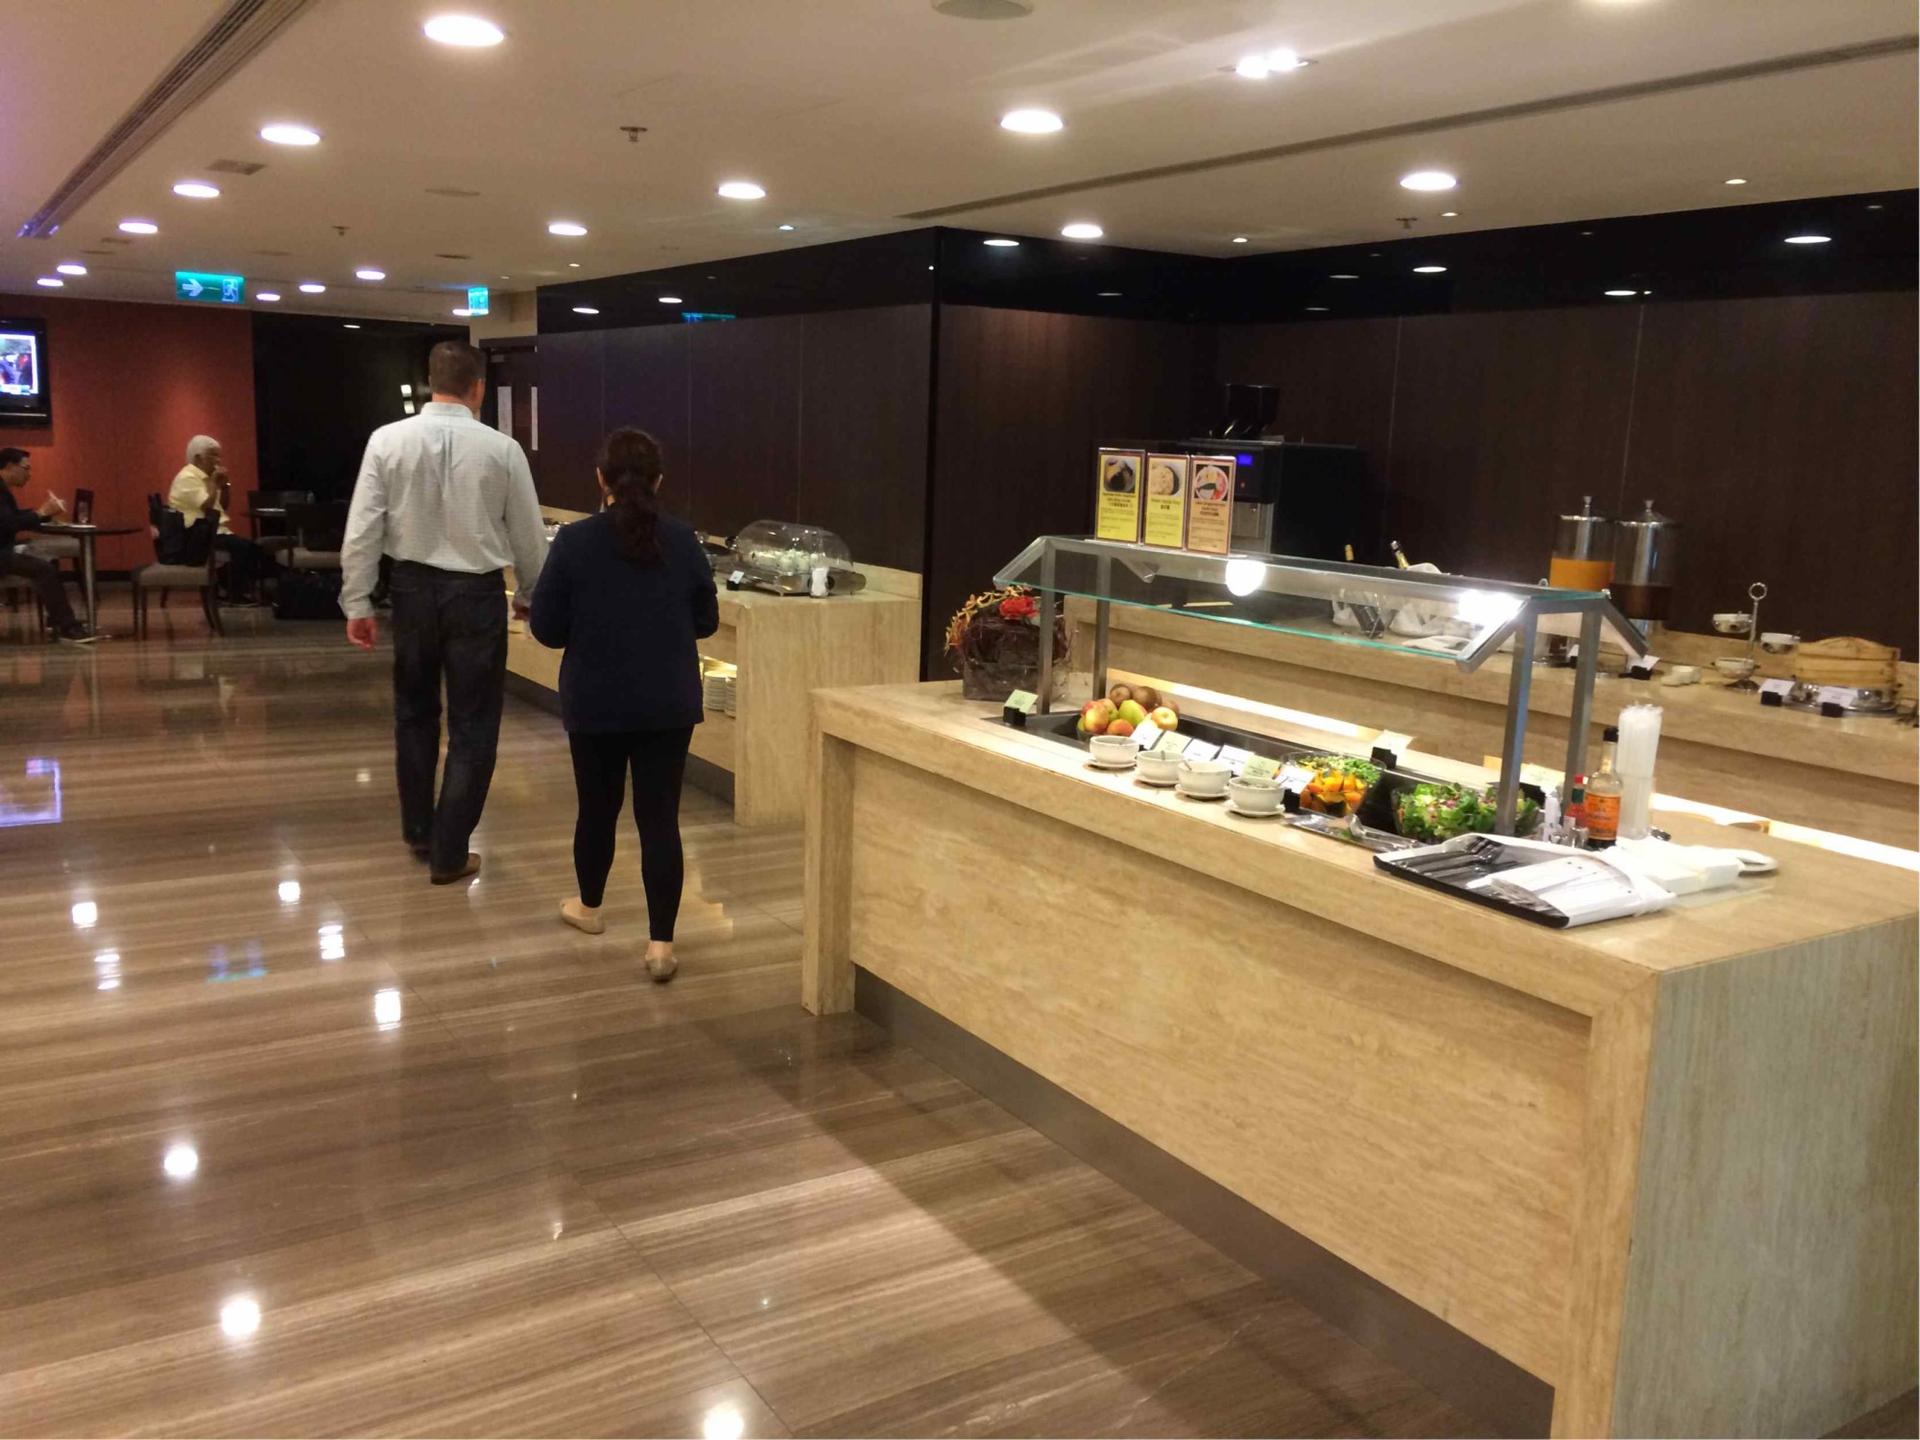 Singapore Airlines SilverKris Business Class Lounge image 4 of 68